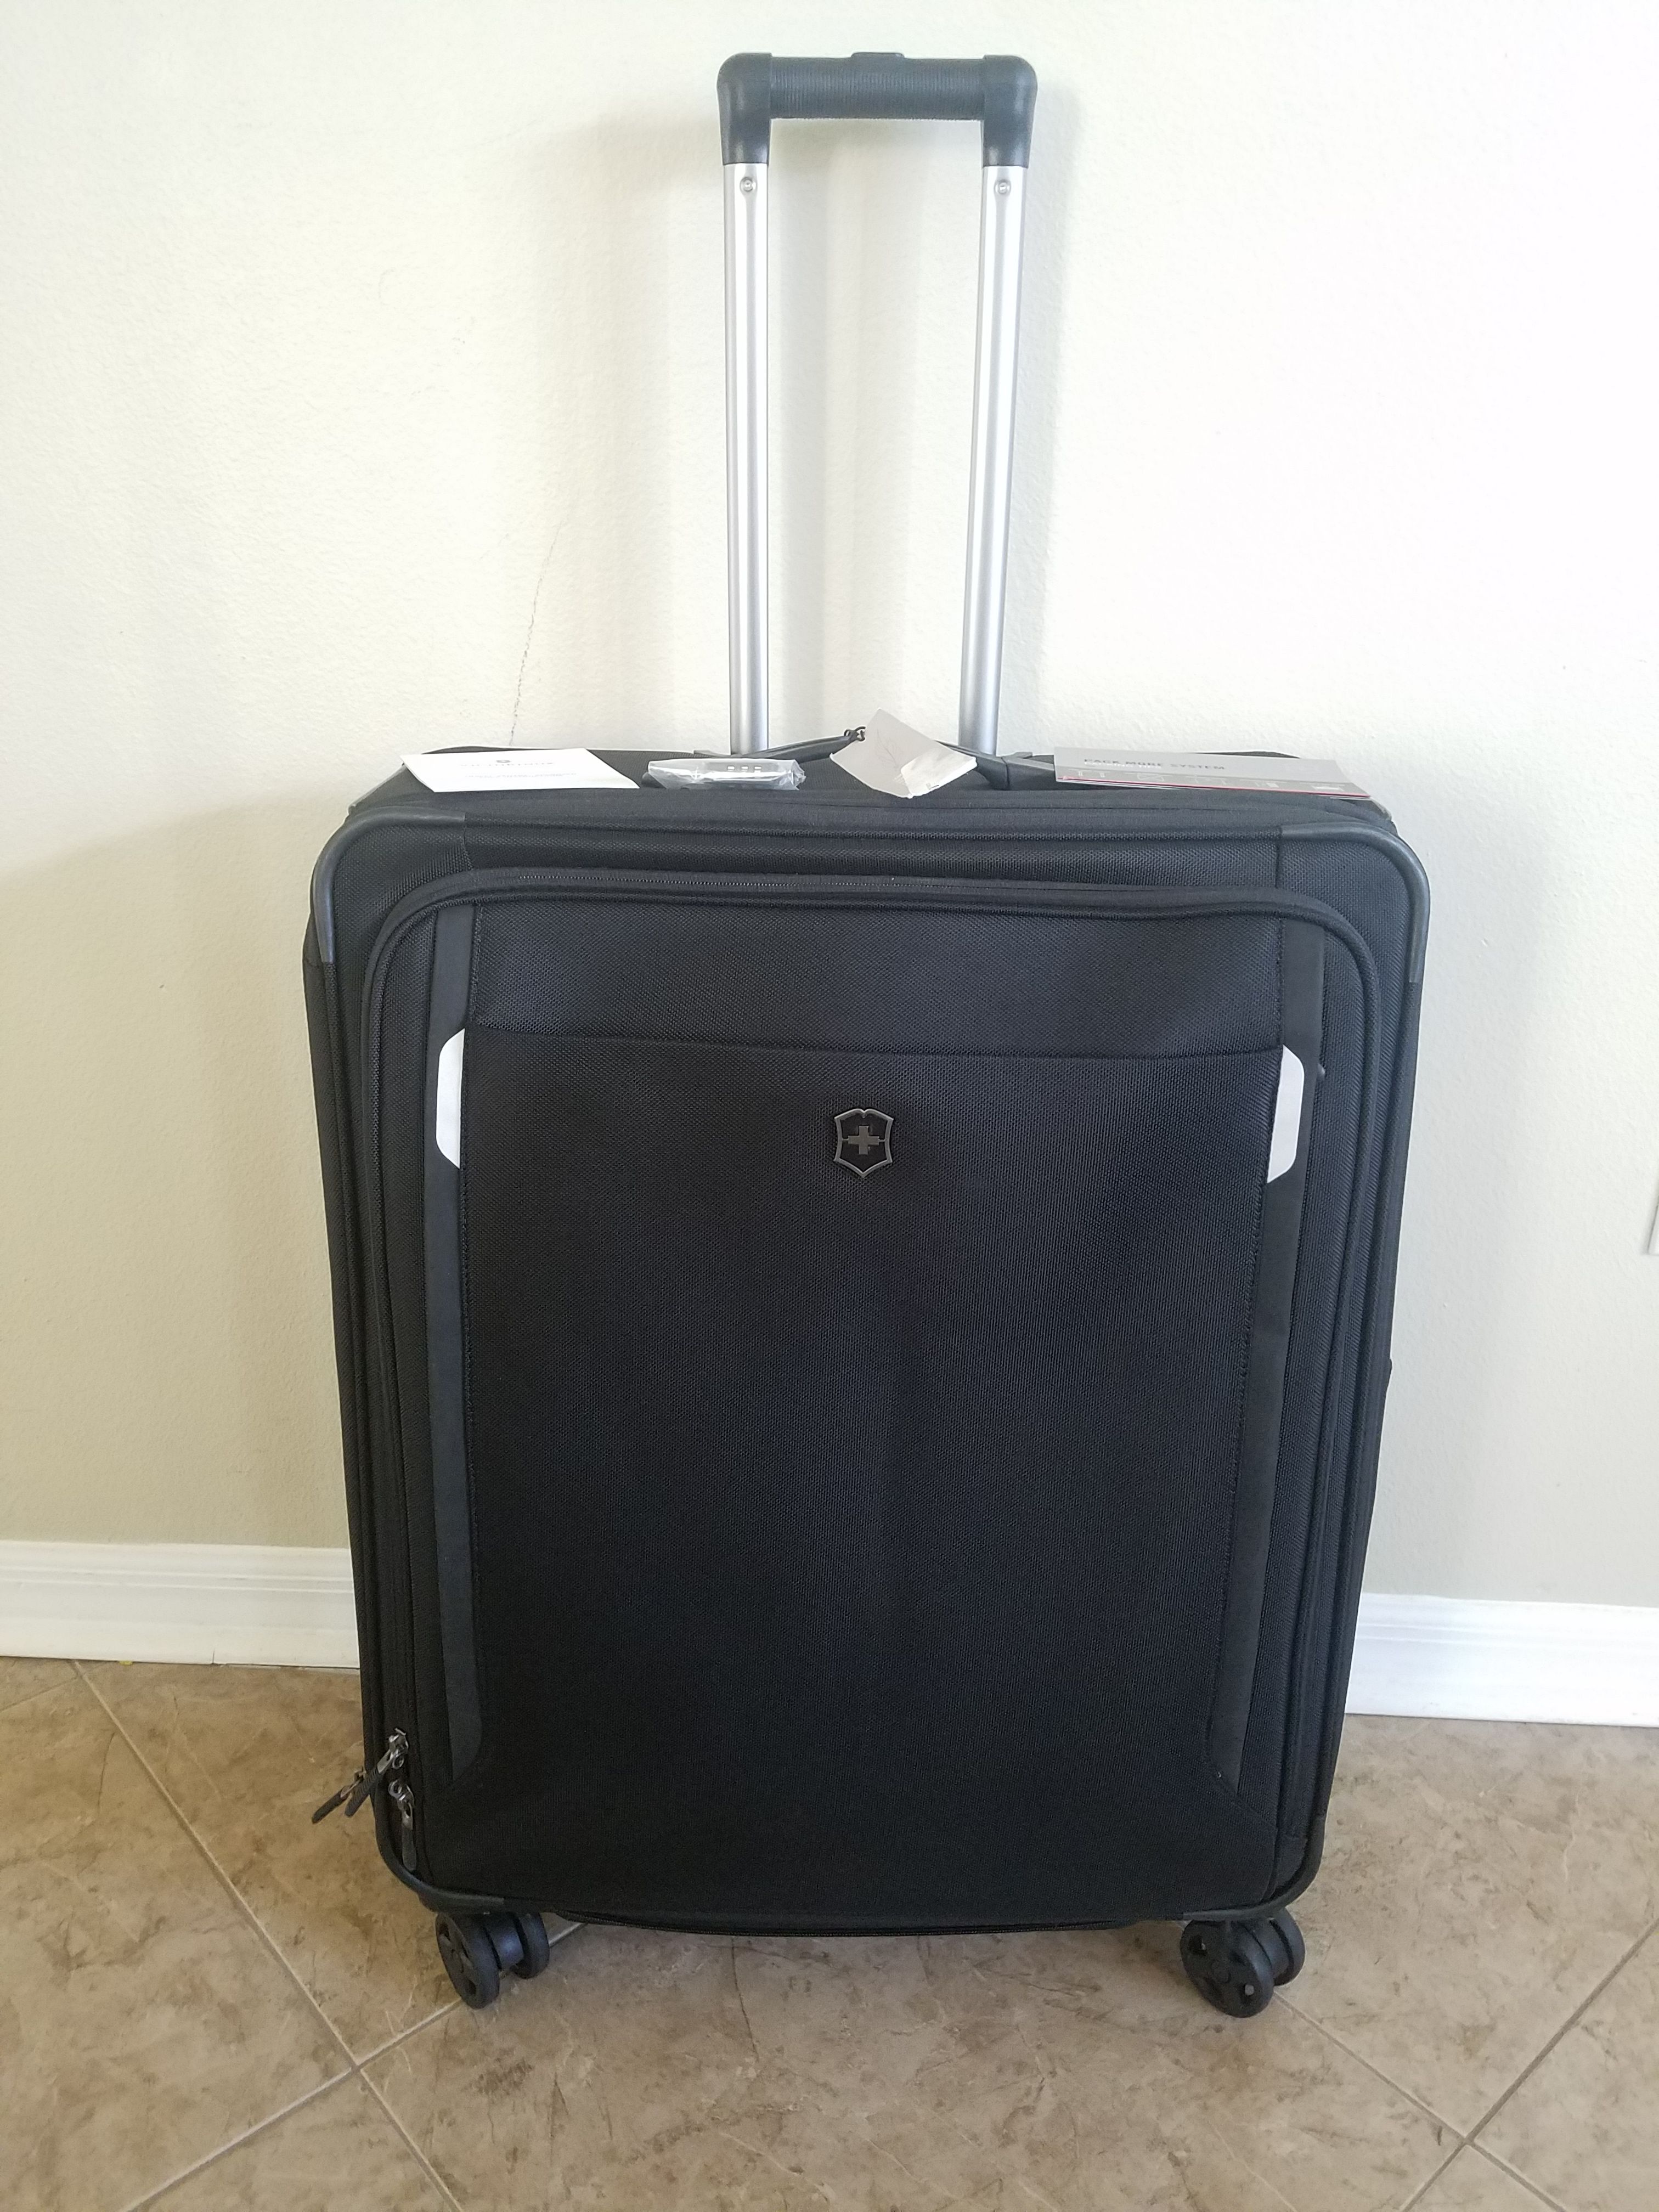 Free delivery Today Victorinox 27" luggage spinner travel bag black like new $600